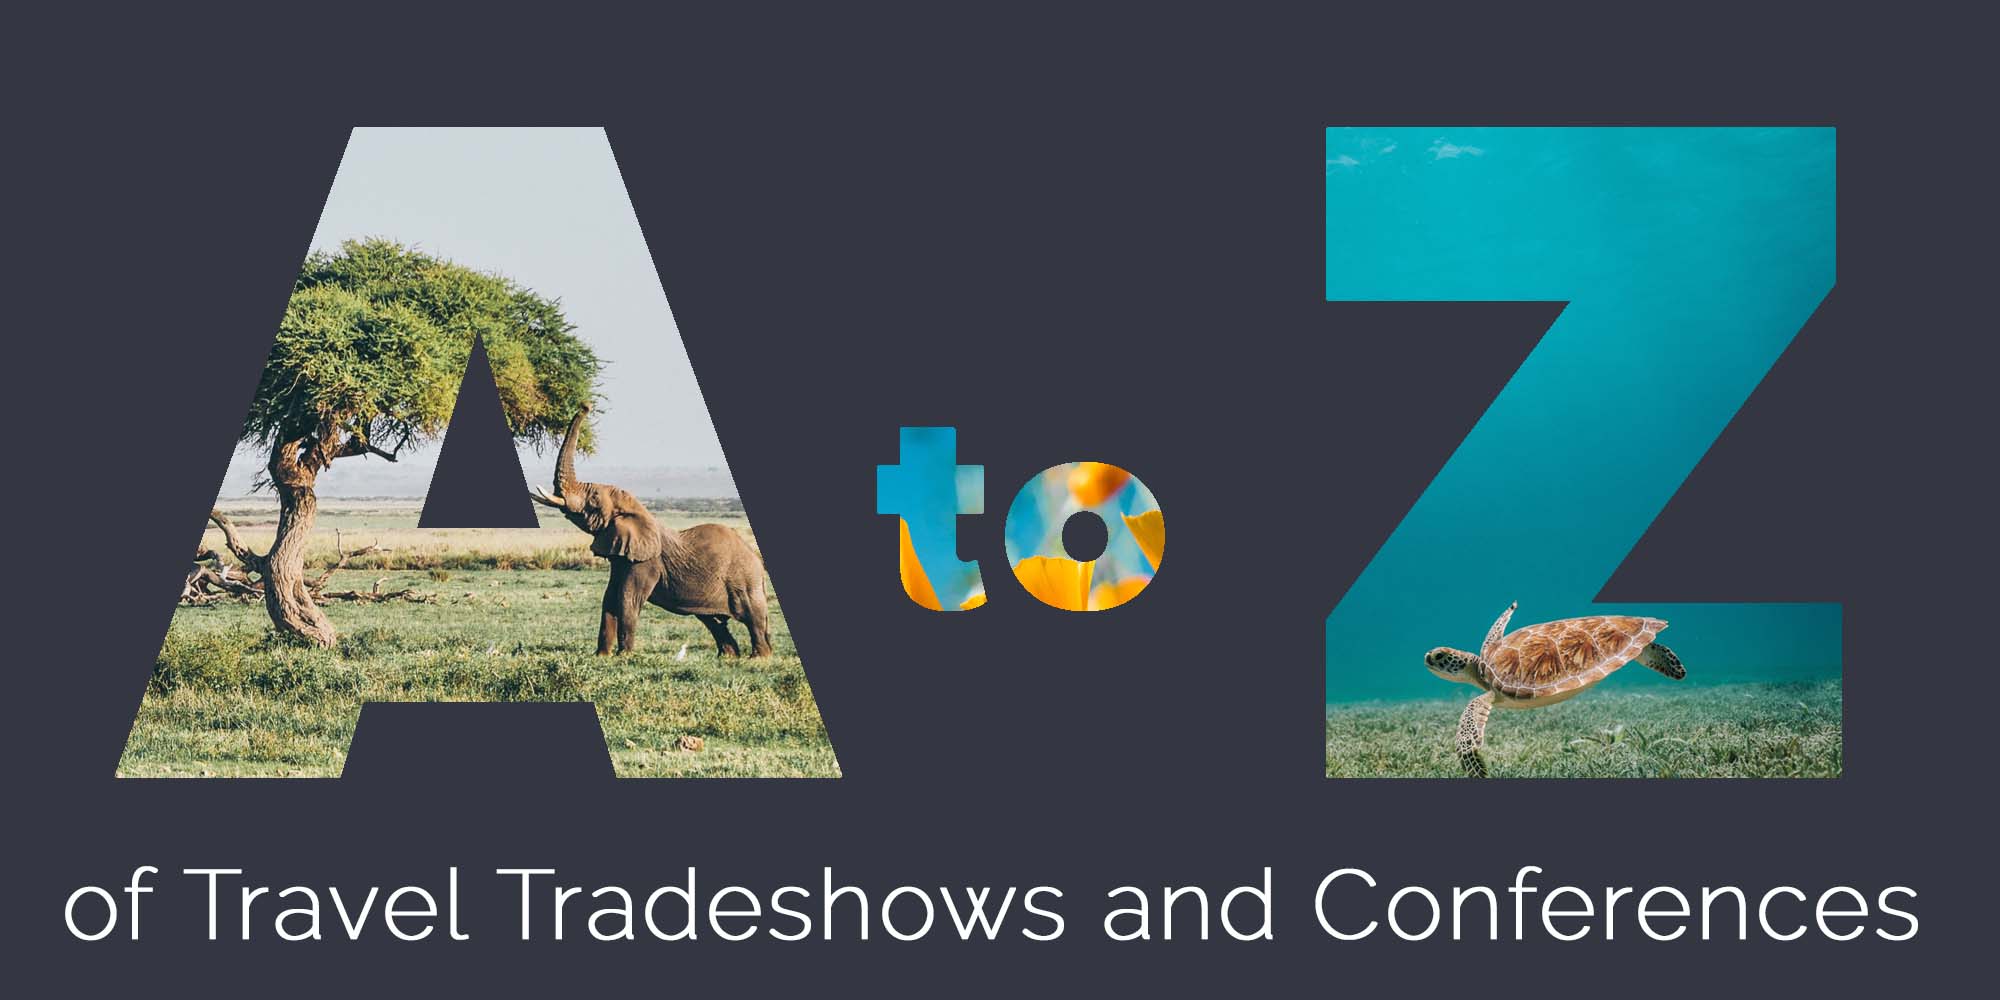 The 2020 Travel Trade Show and Conference Glossary